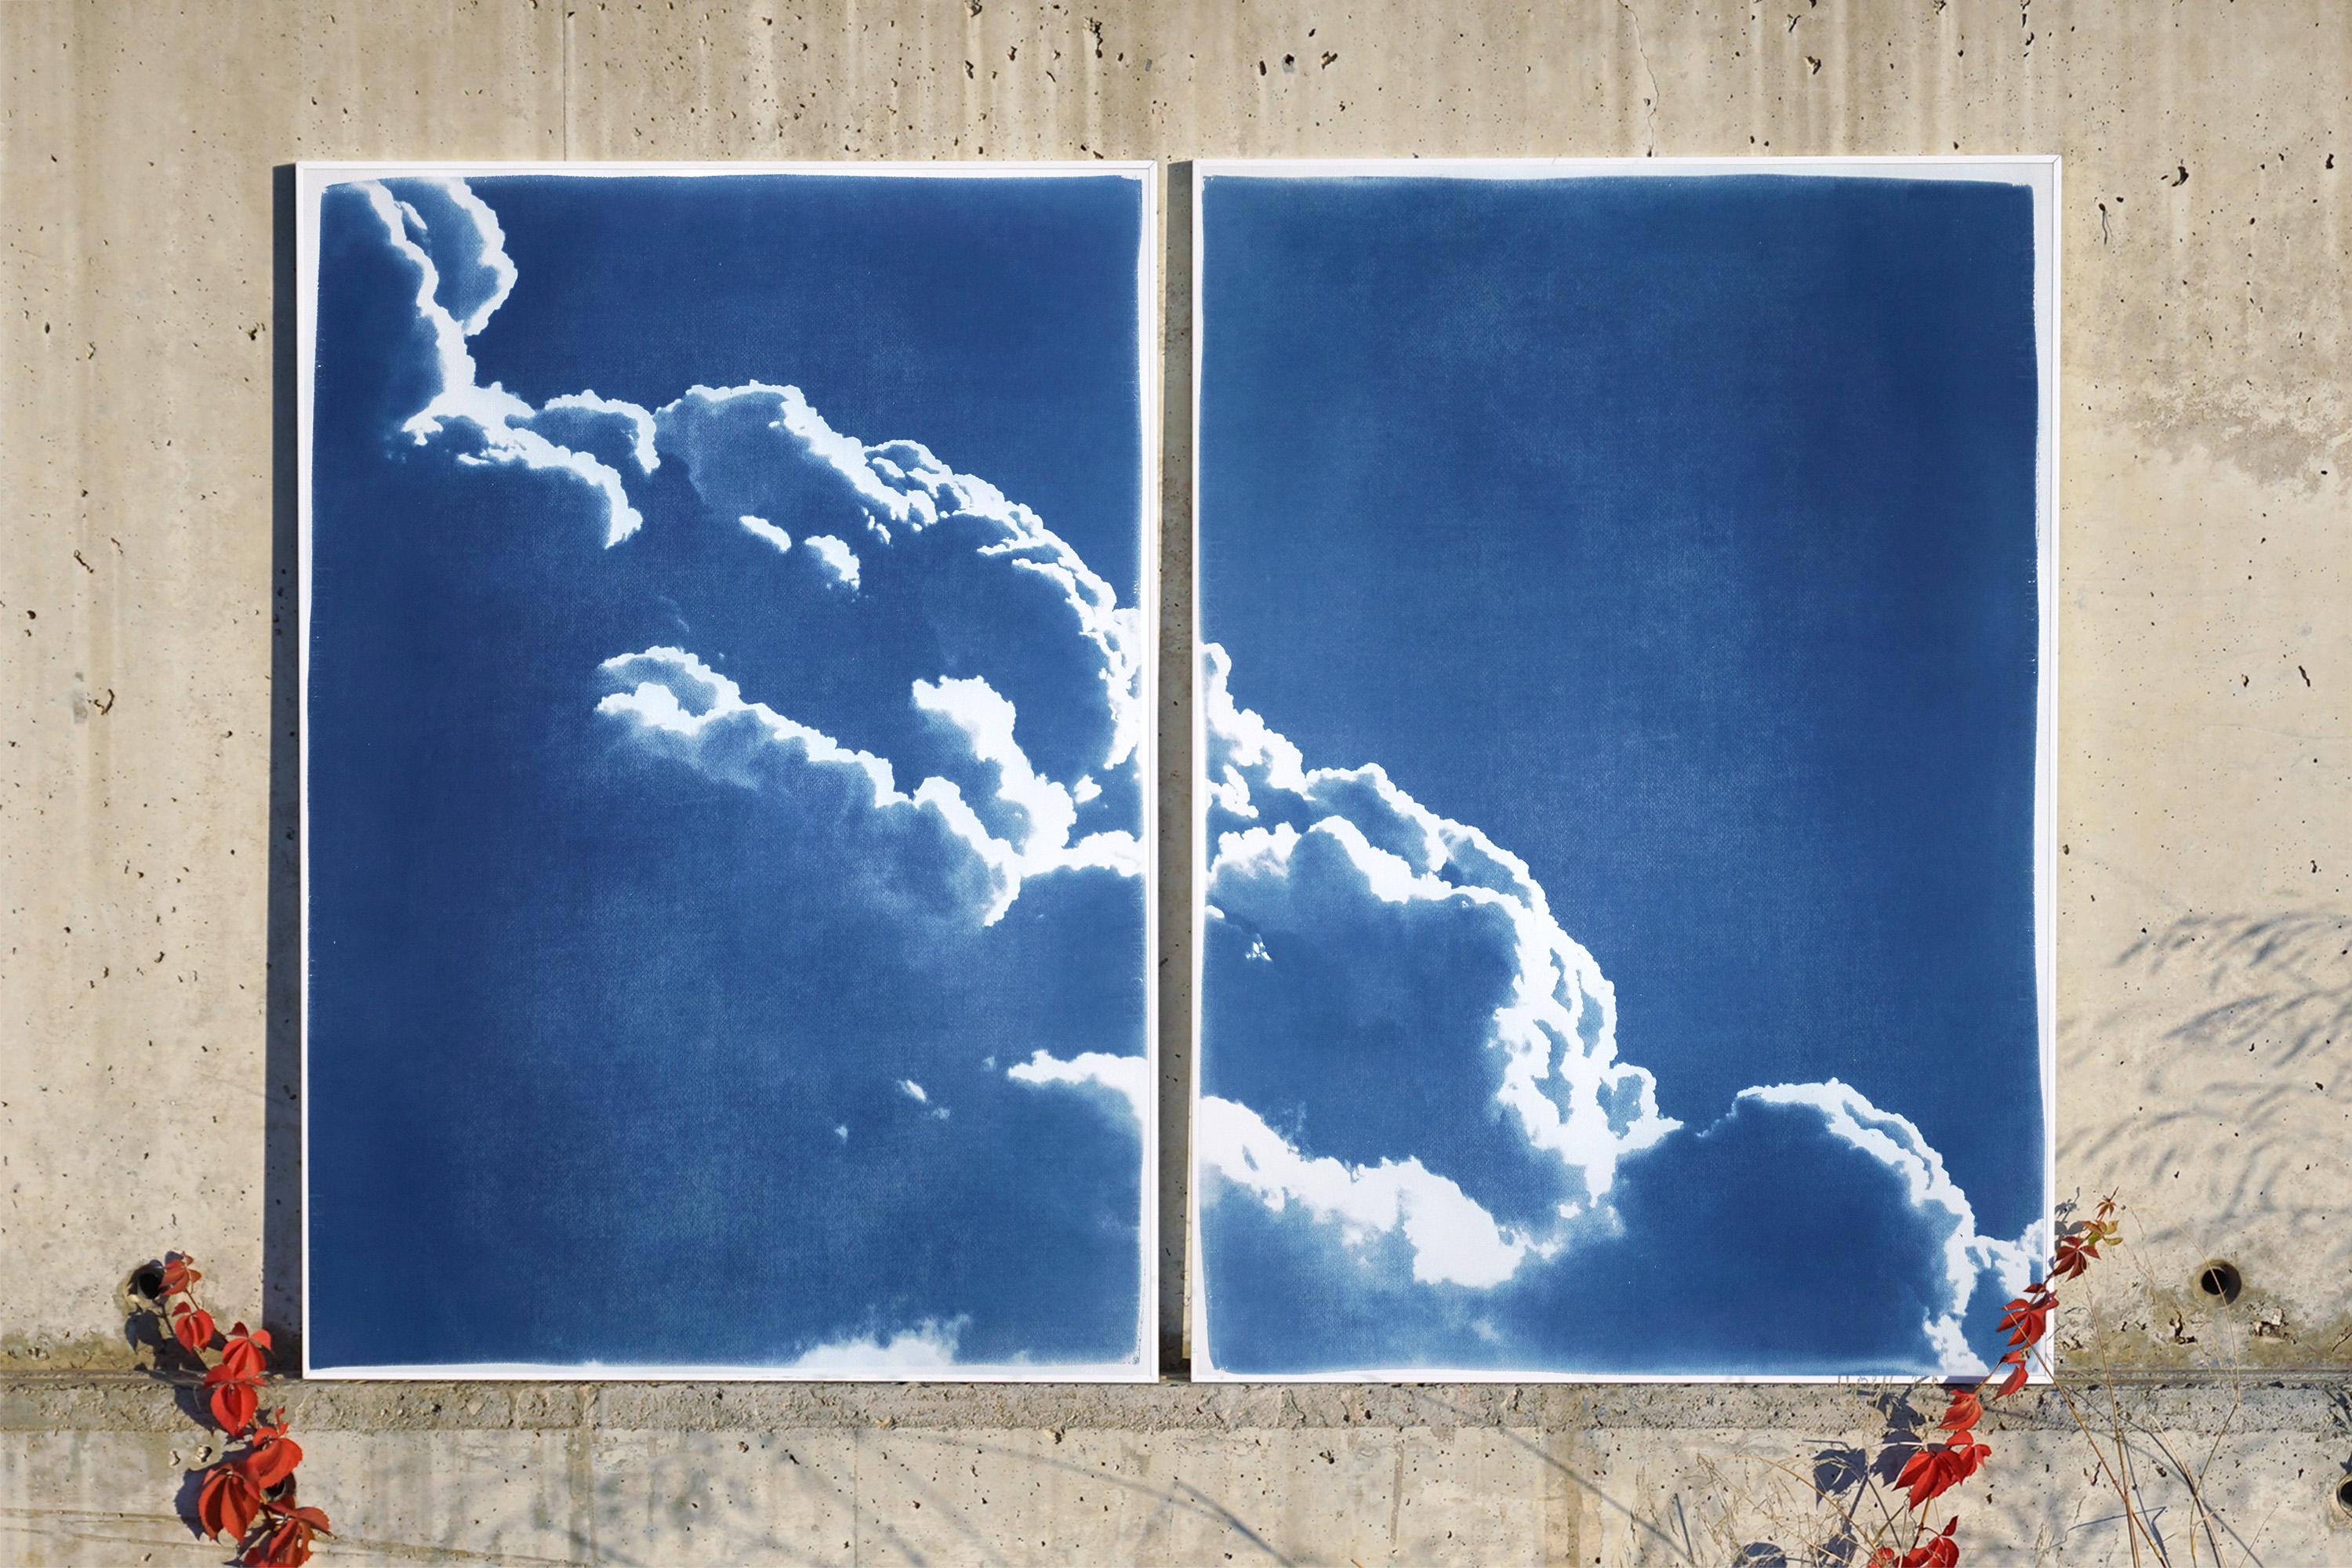 Diptych of Floating Clouds, Blue Tones Sky Scene Cyanotype Print of Silky Shapes - Realist Photograph by Kind of Cyan